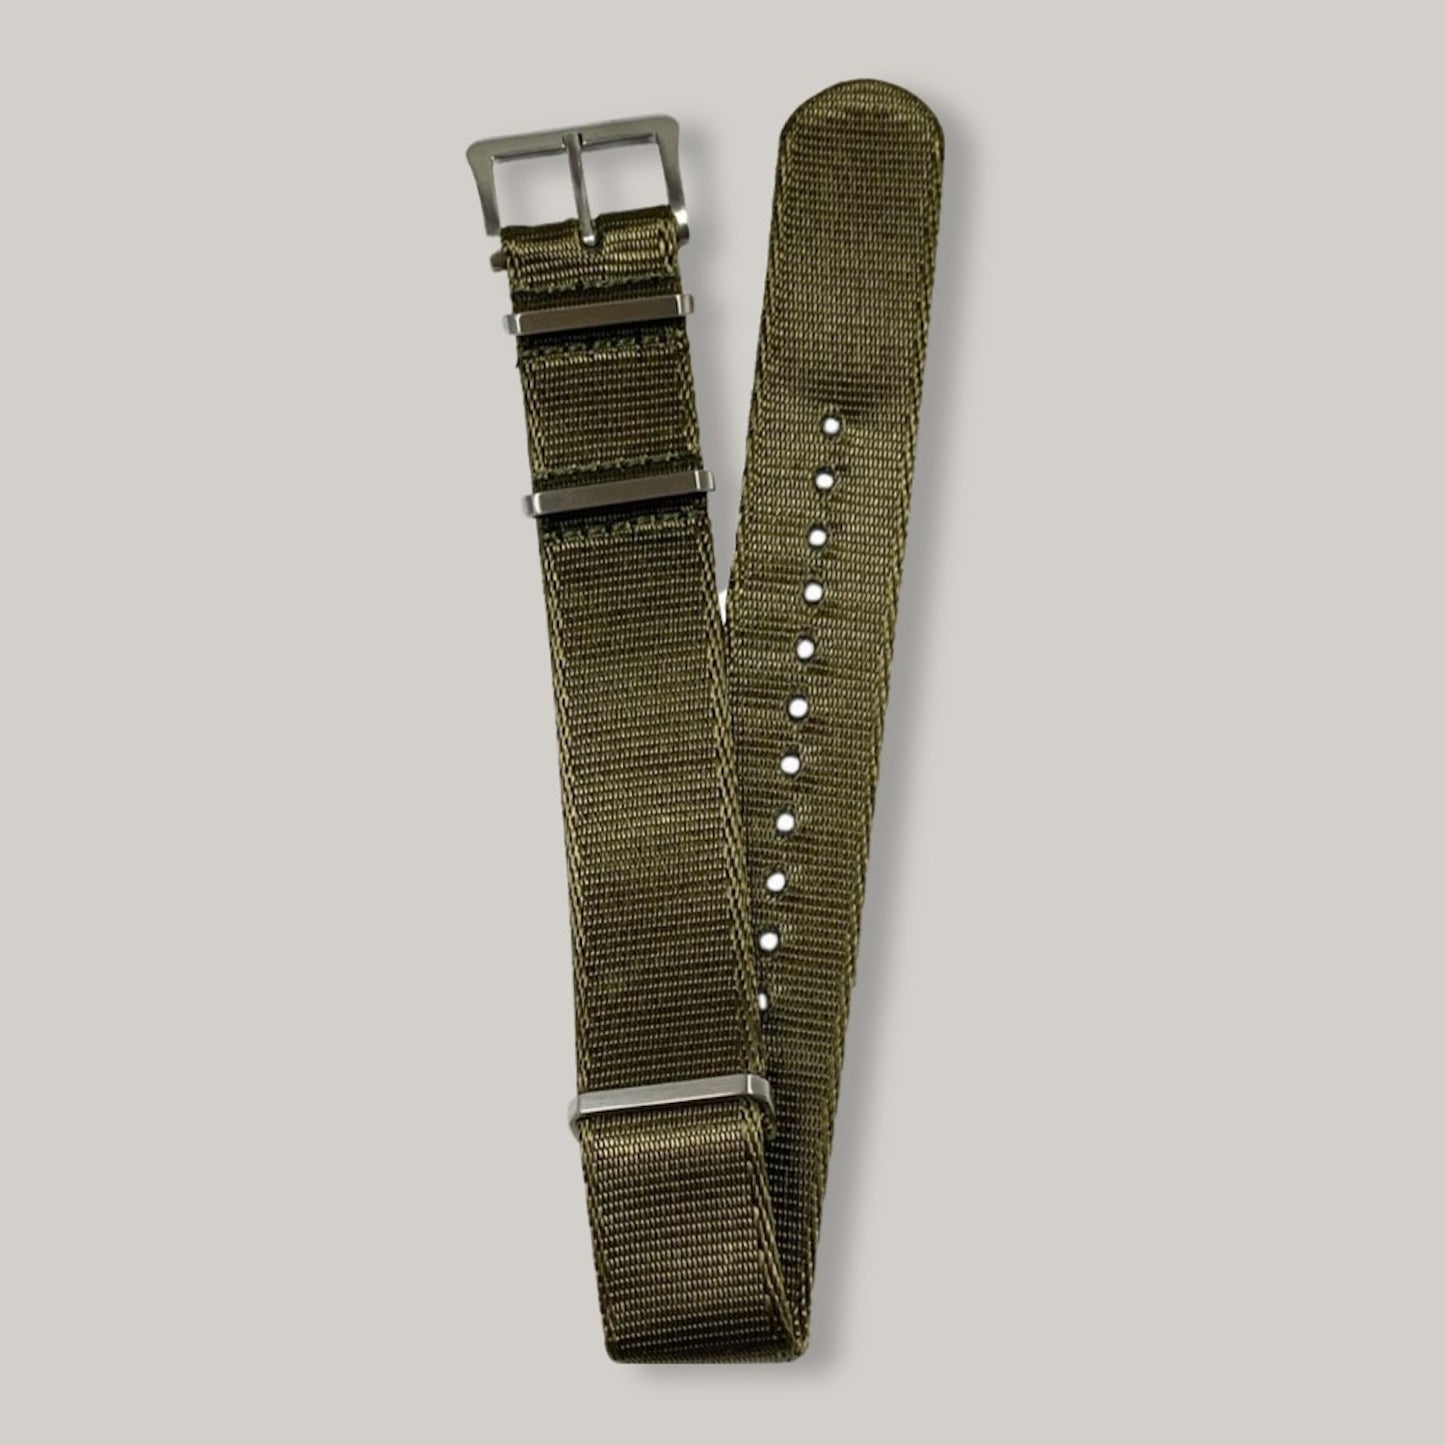 Naval Watch Co. DELUXE NATO WATCH STRAP - OLIVE GREEN